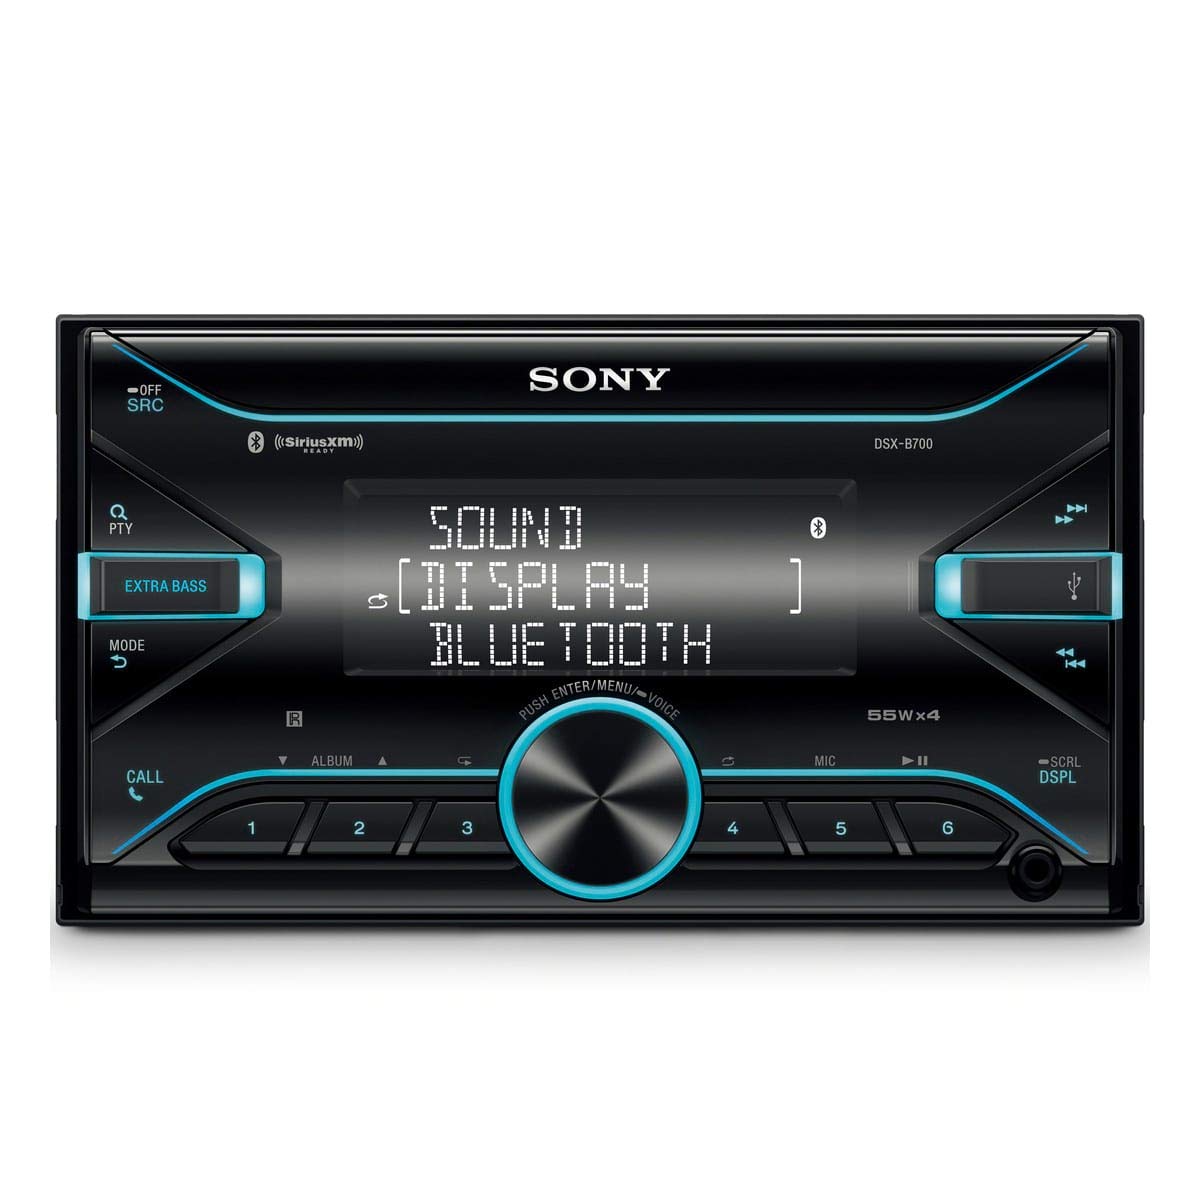 Sony Dsx-B700 Media Receiver with Bluetooth Technology